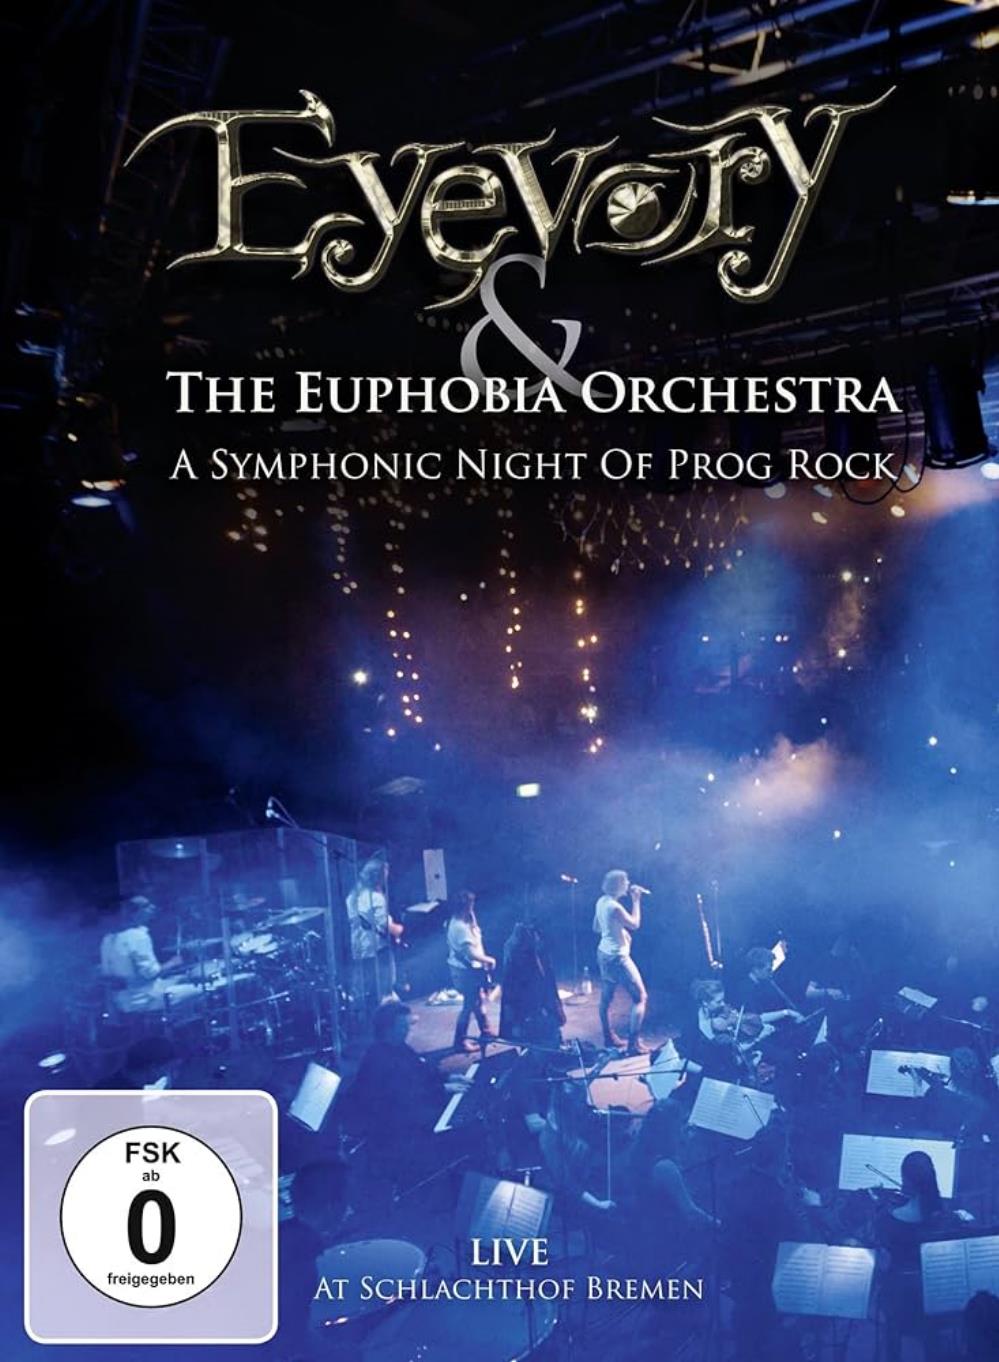 Eyevory A Symphonic Night of Prog Rock (with The Euphobia Orchestra) album cover